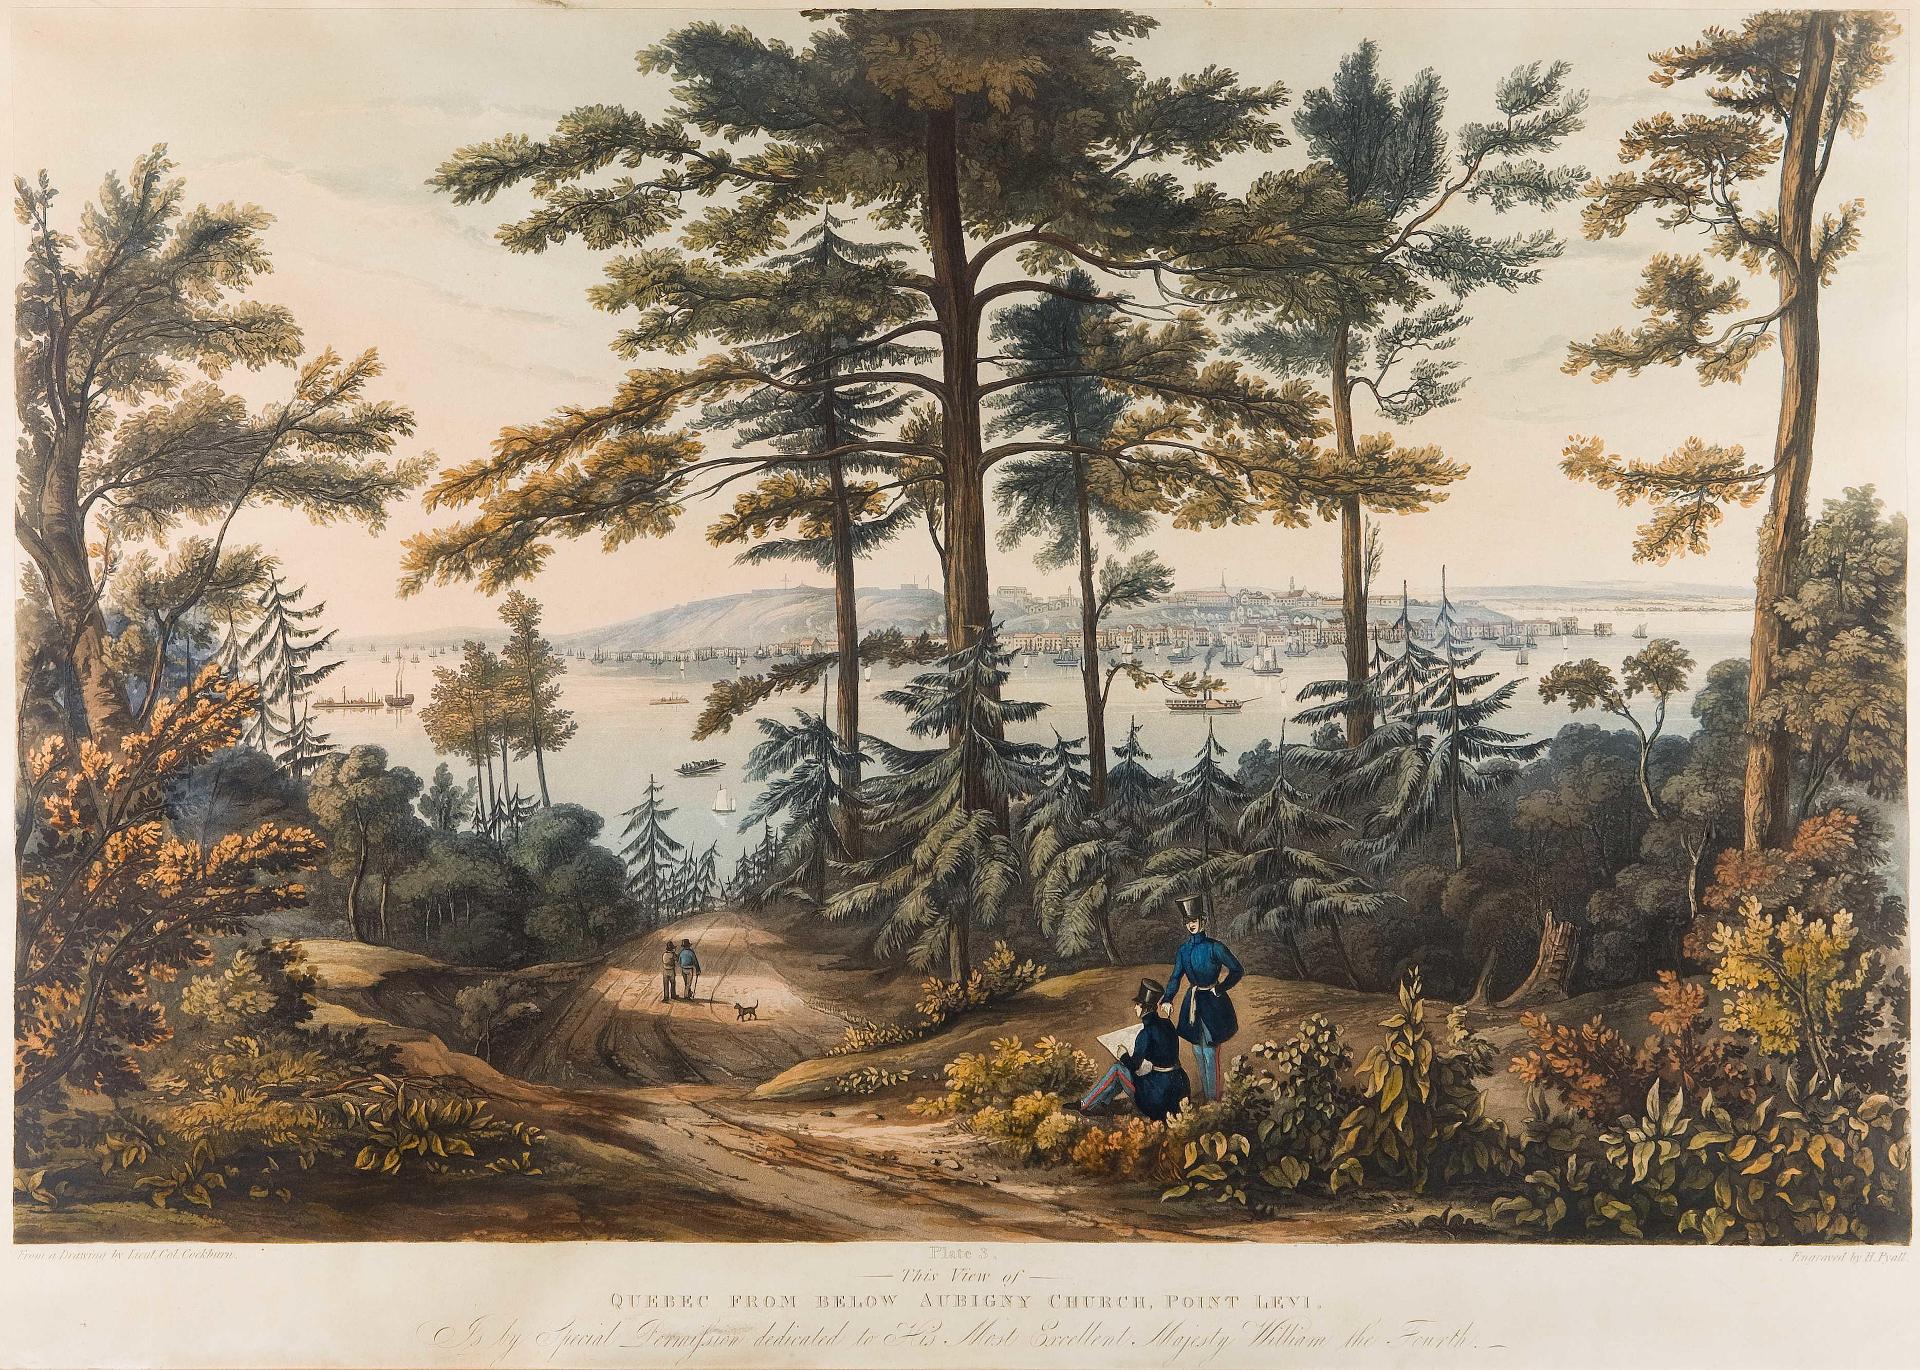 James Pattison Cockburn (1778-1847) - Québec From Below Aubigny Church, Point Levi. Plate 3, by H Pyall, published by Ackerman & Co., London 1833